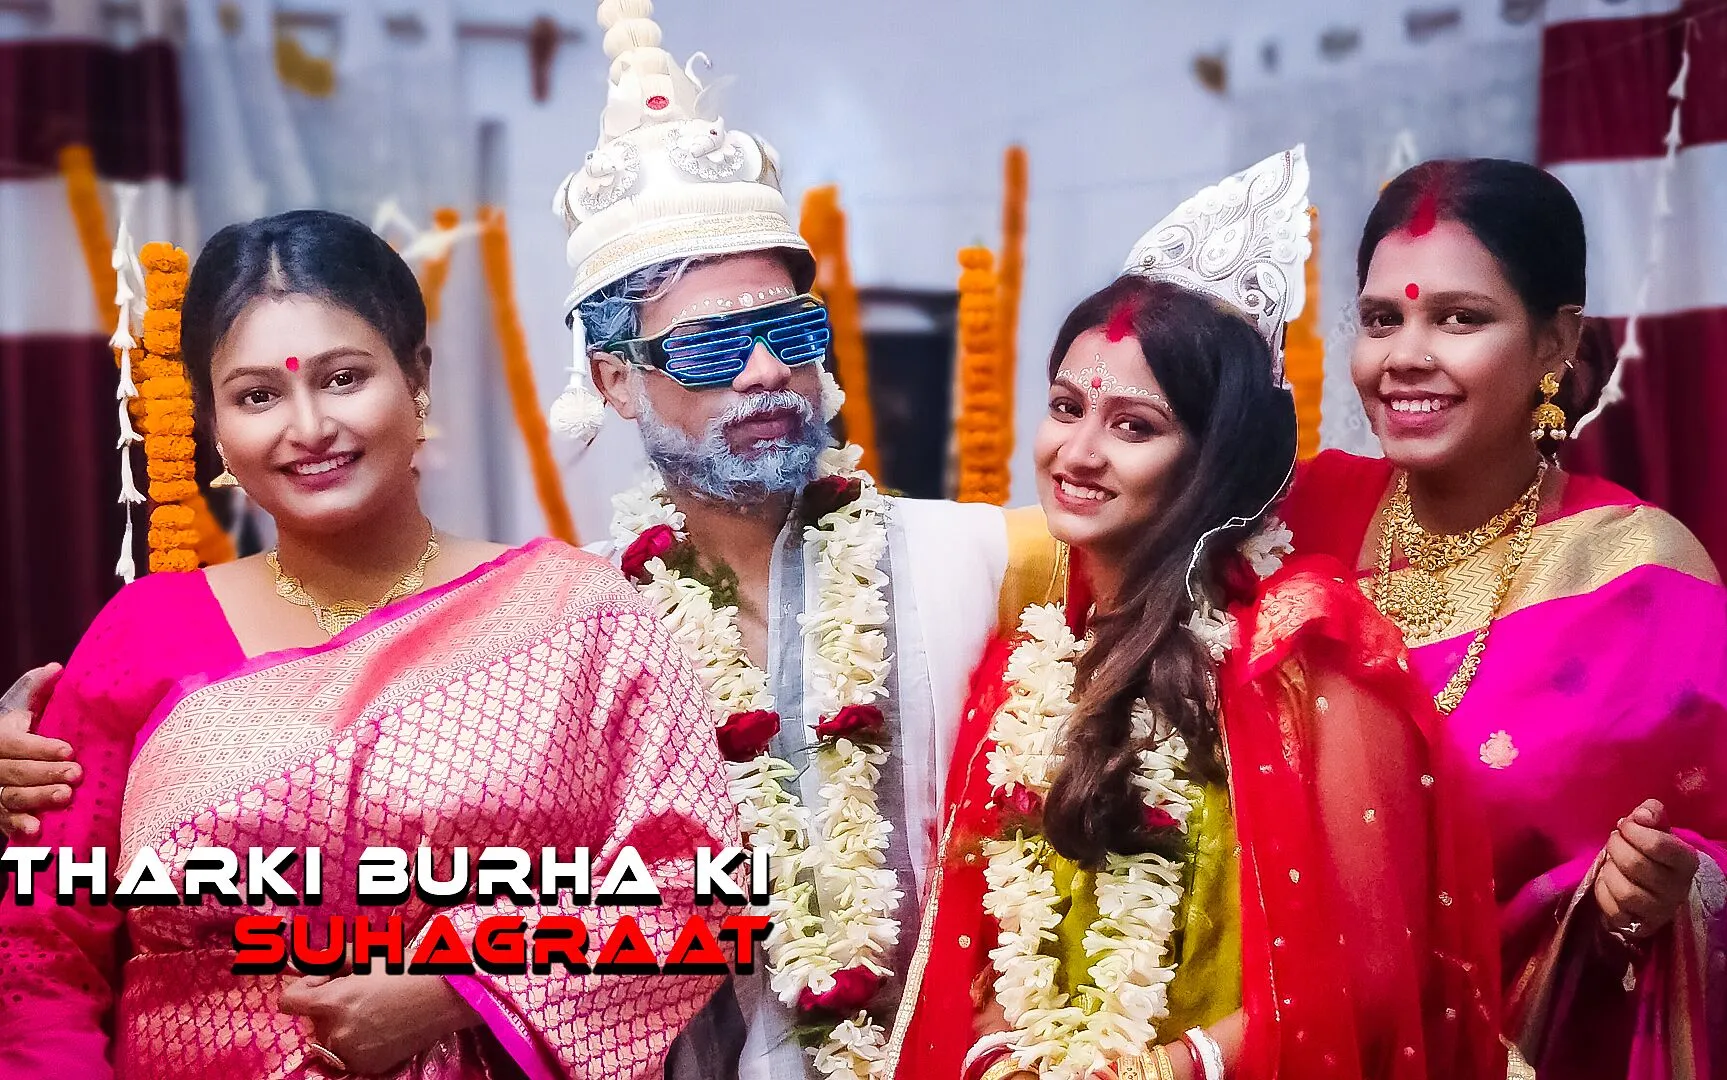 Crazy old man turns out to celebrate honeymoon with his three newly wed wives by Cine Flix Media Faphouse pic